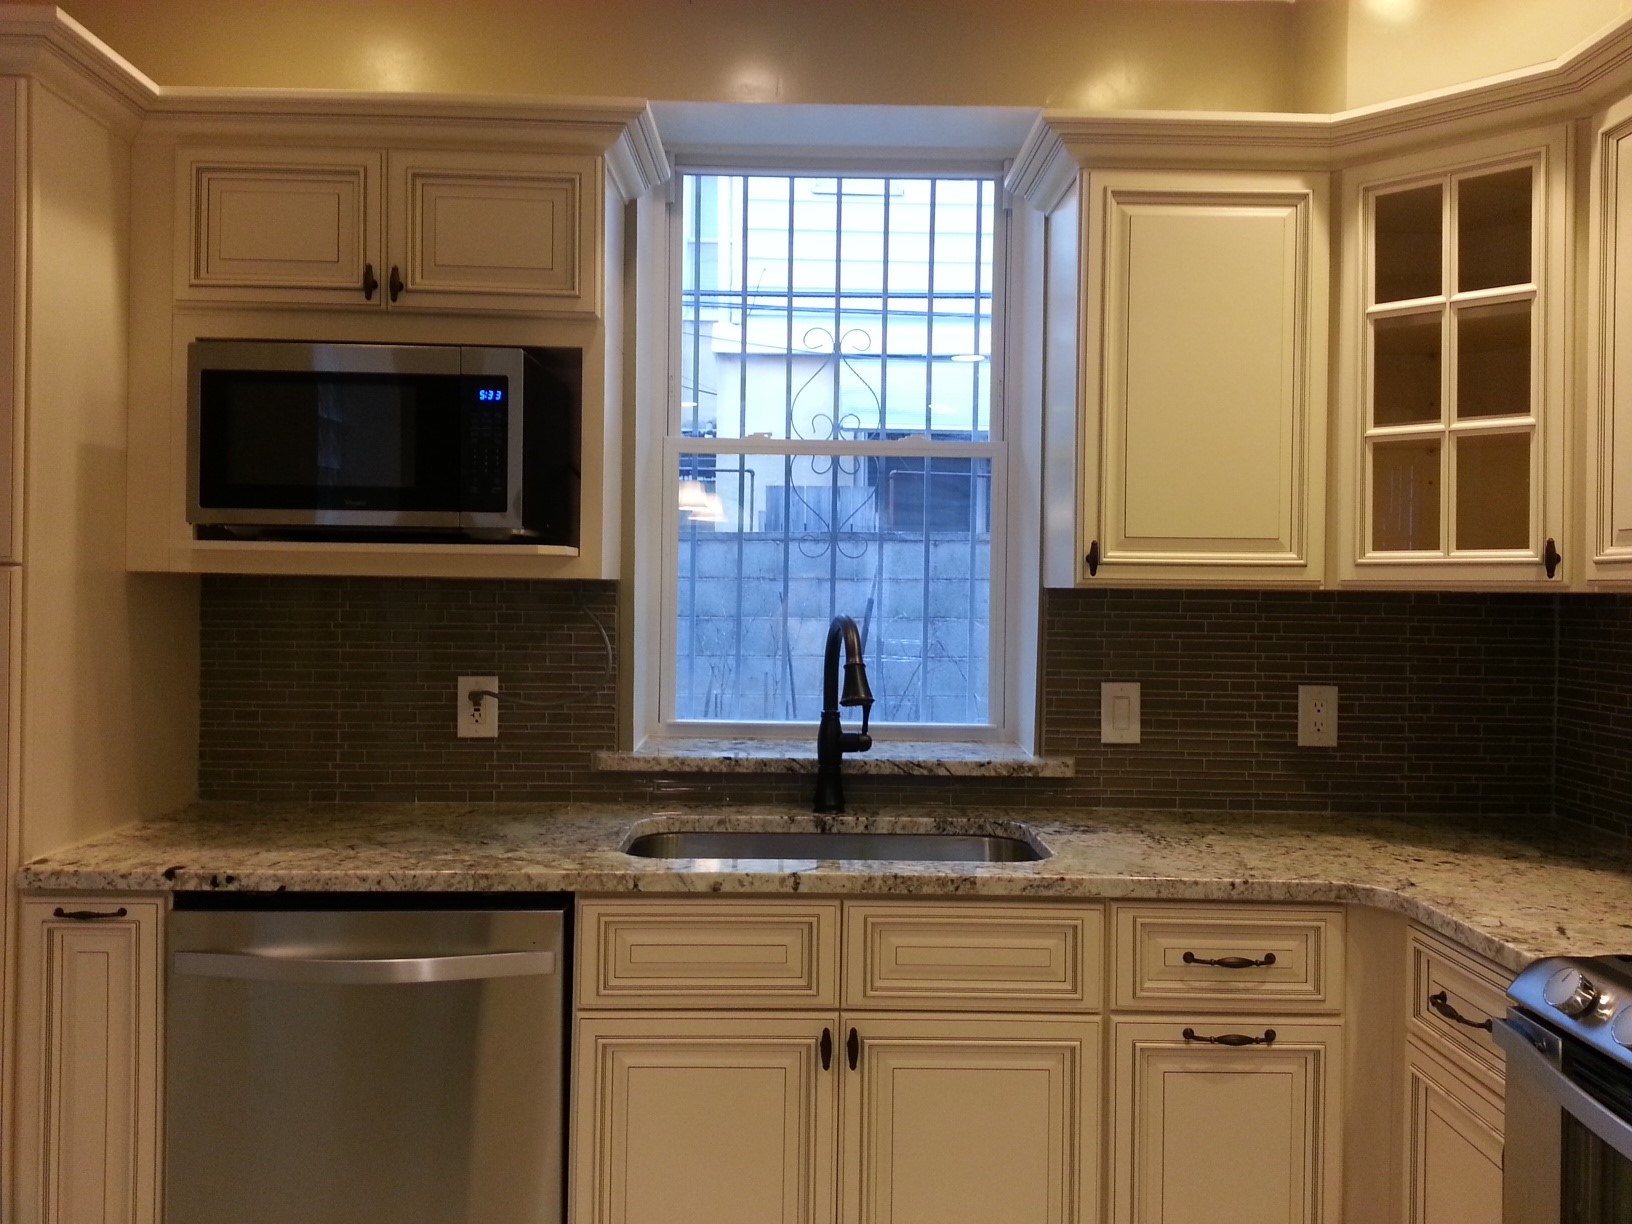 Philadelphia Kitchen Cabinet And Countertop Experts